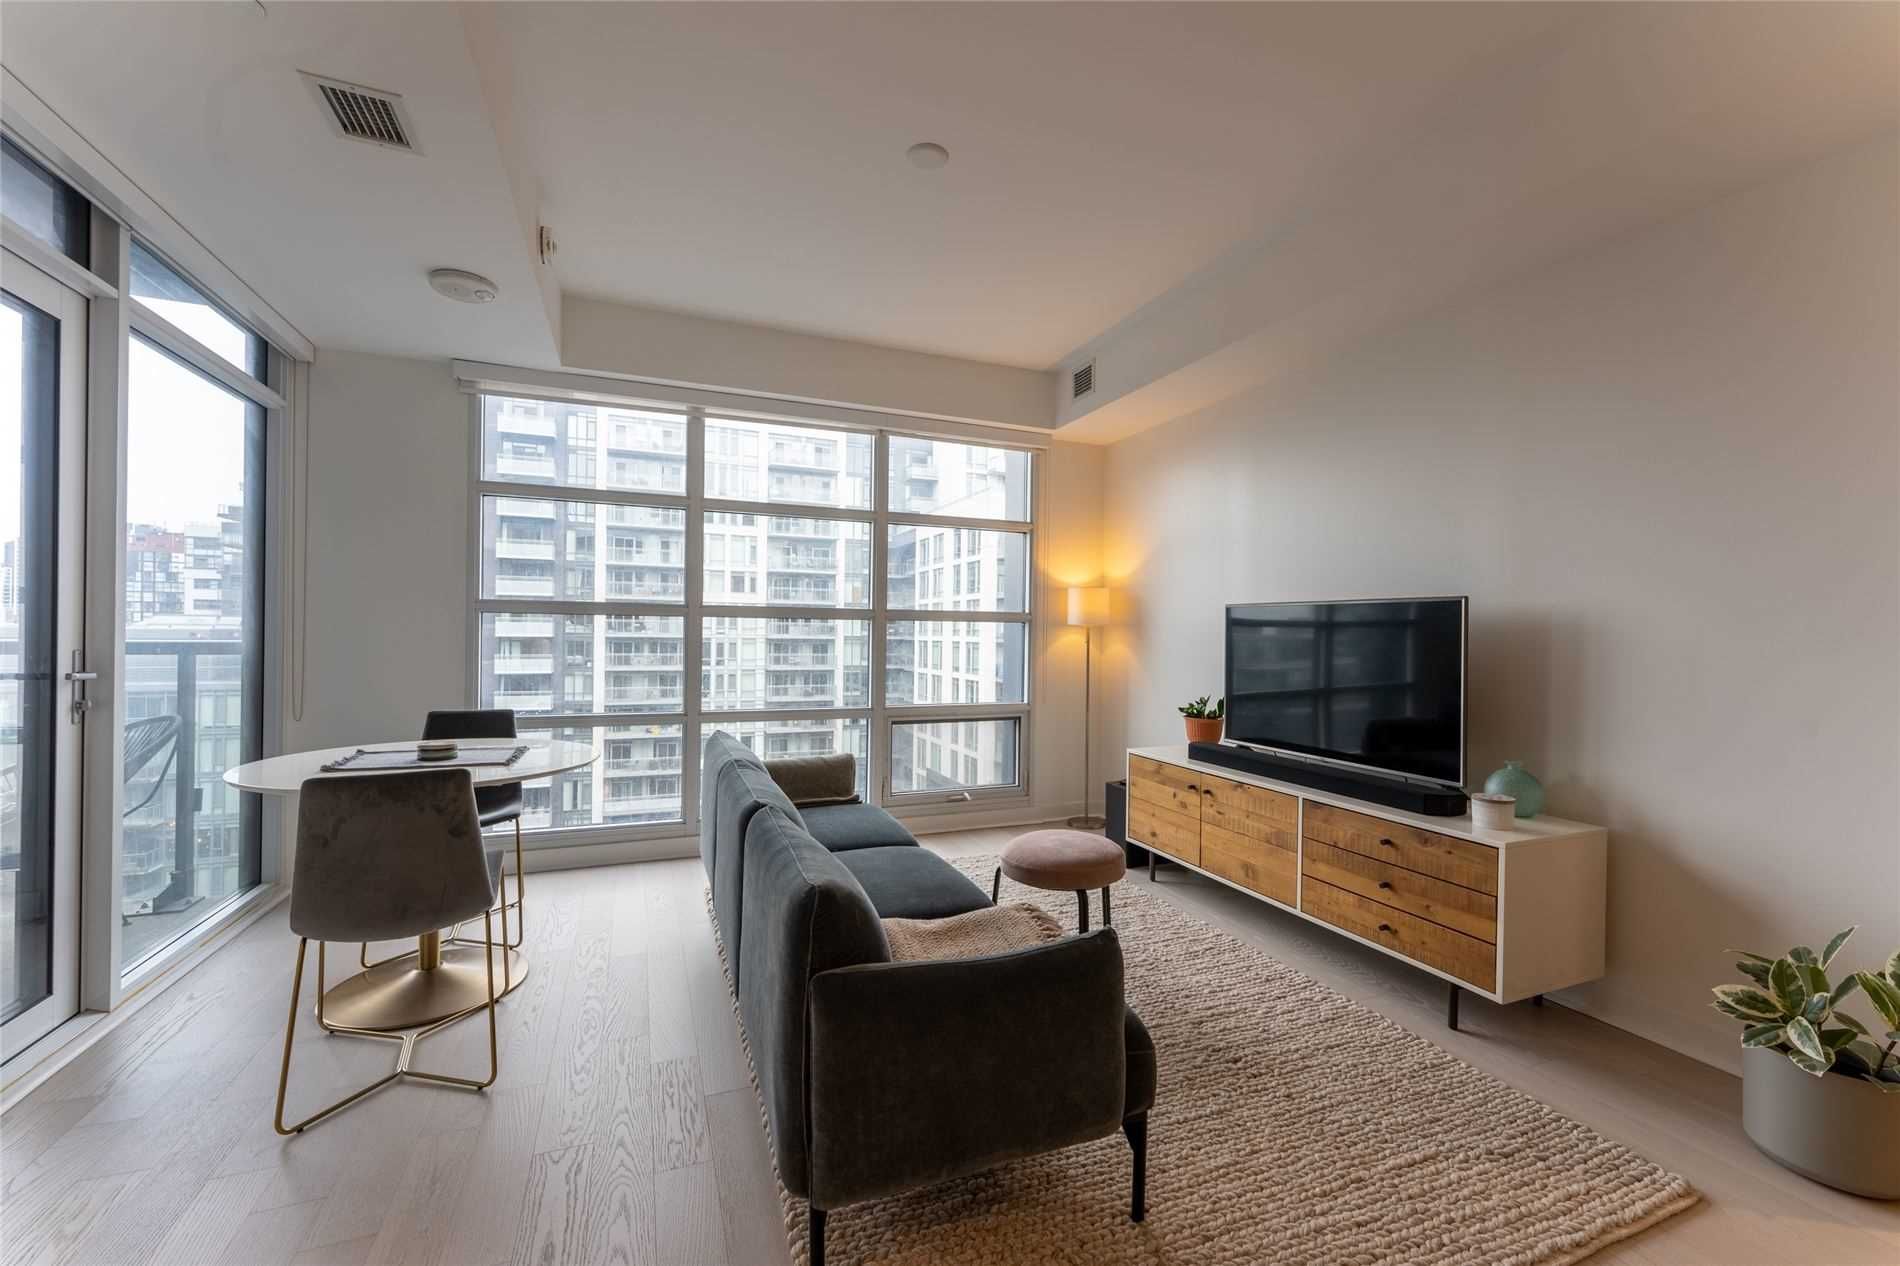 I have sold a property at 1107 501 Adelaide ST W in Toronto
